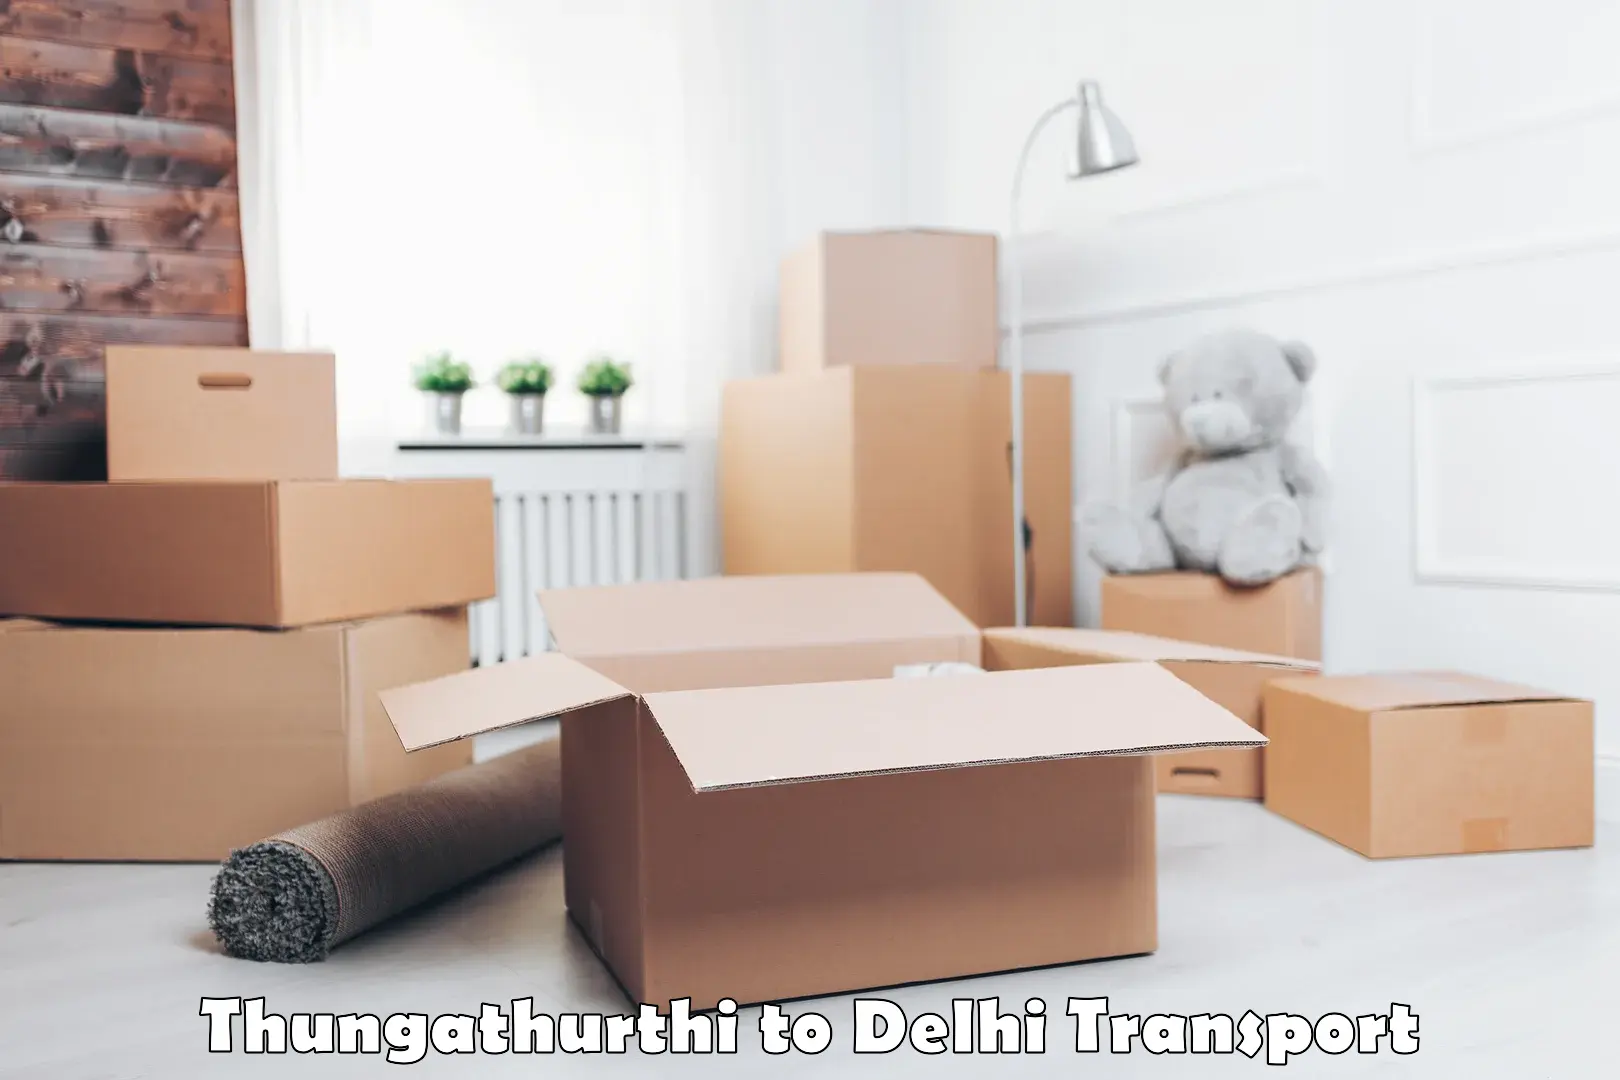 Truck transport companies in India Thungathurthi to Delhi